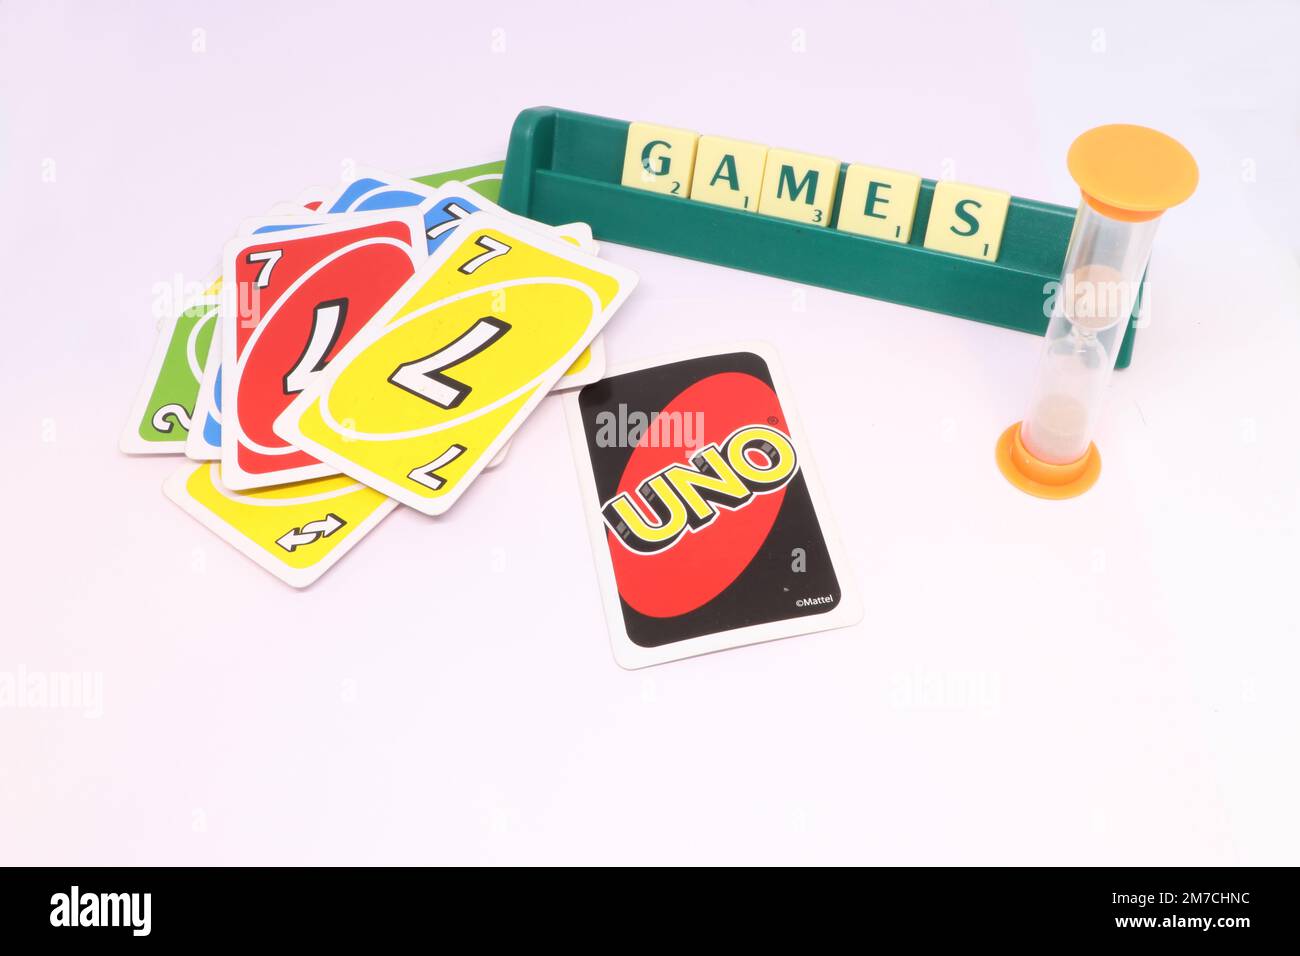 A concept of a games night showing the word 'games' spelled in scrabble tiles on a tile rack. UNO cards are spread out in a pile with a sand timer. Stock Photo